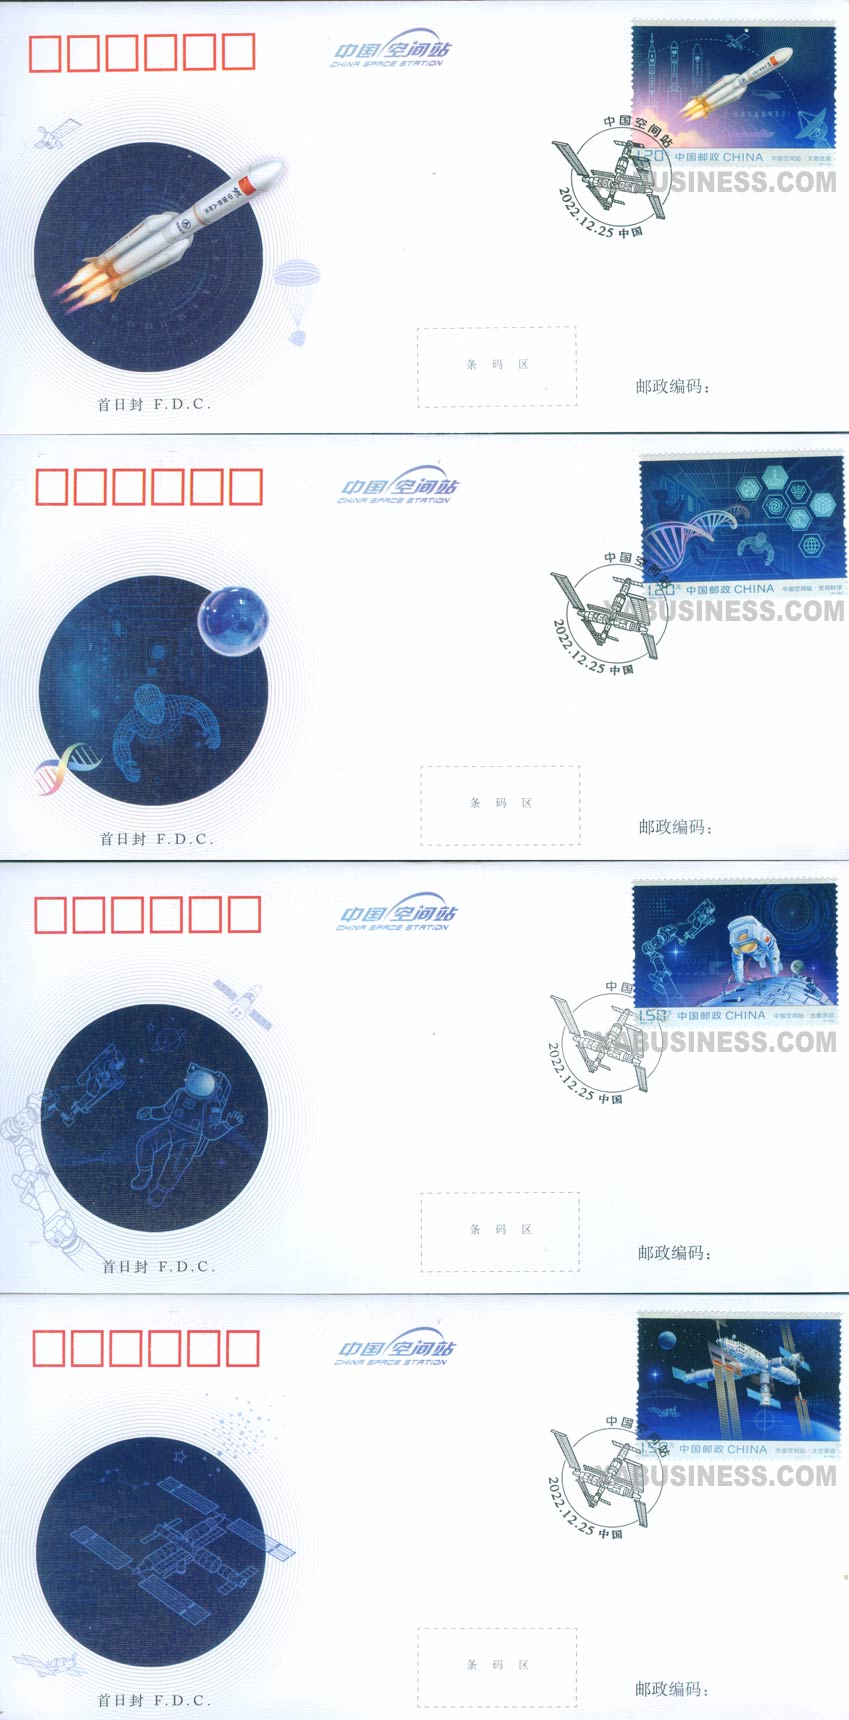 China Space Station (FDC)